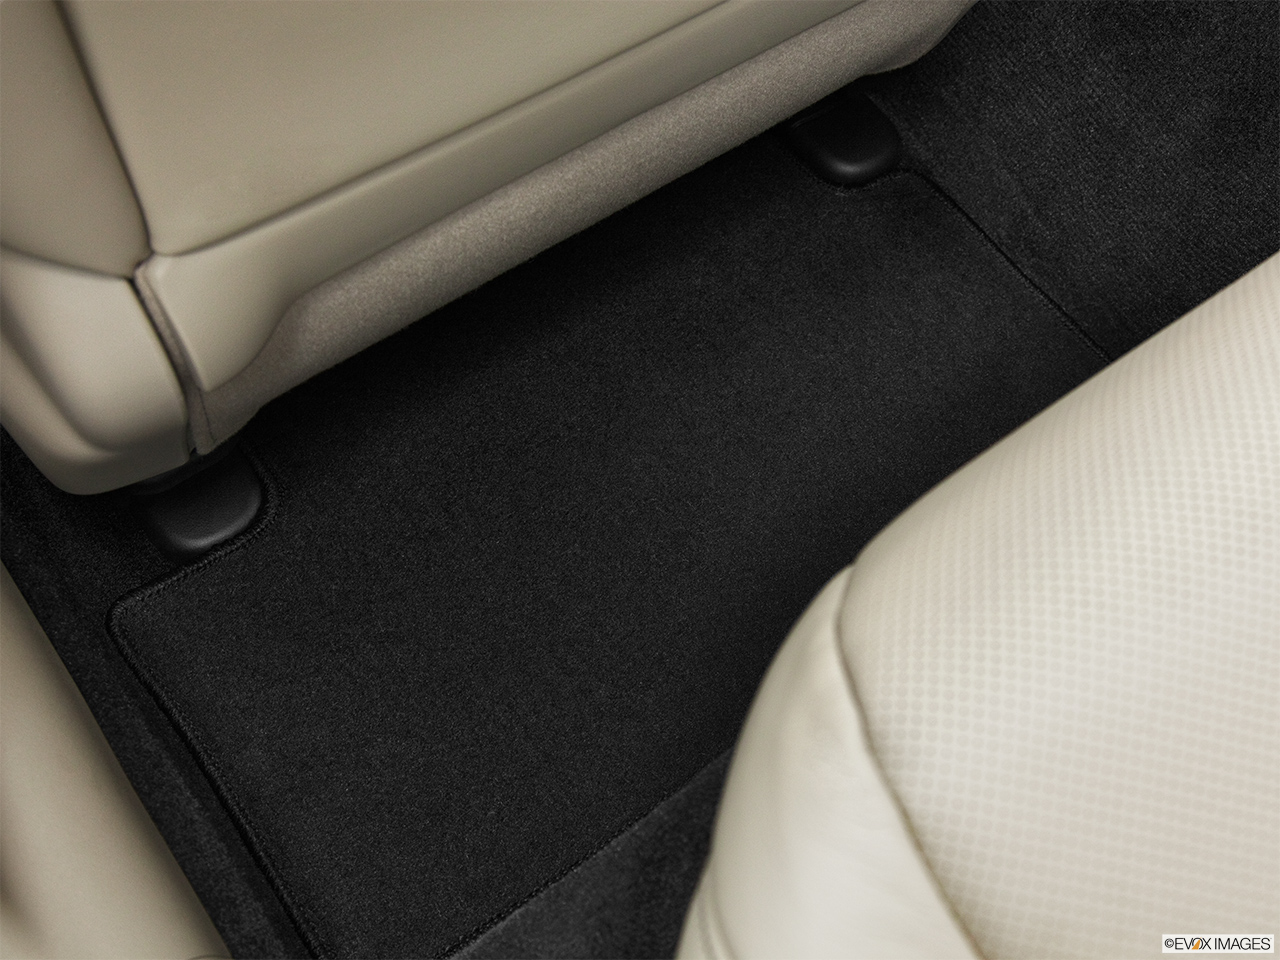 2012 Acura TSX Sport Wagon Rear driver's side floor mat. Mid-seat level from outside looking in. 